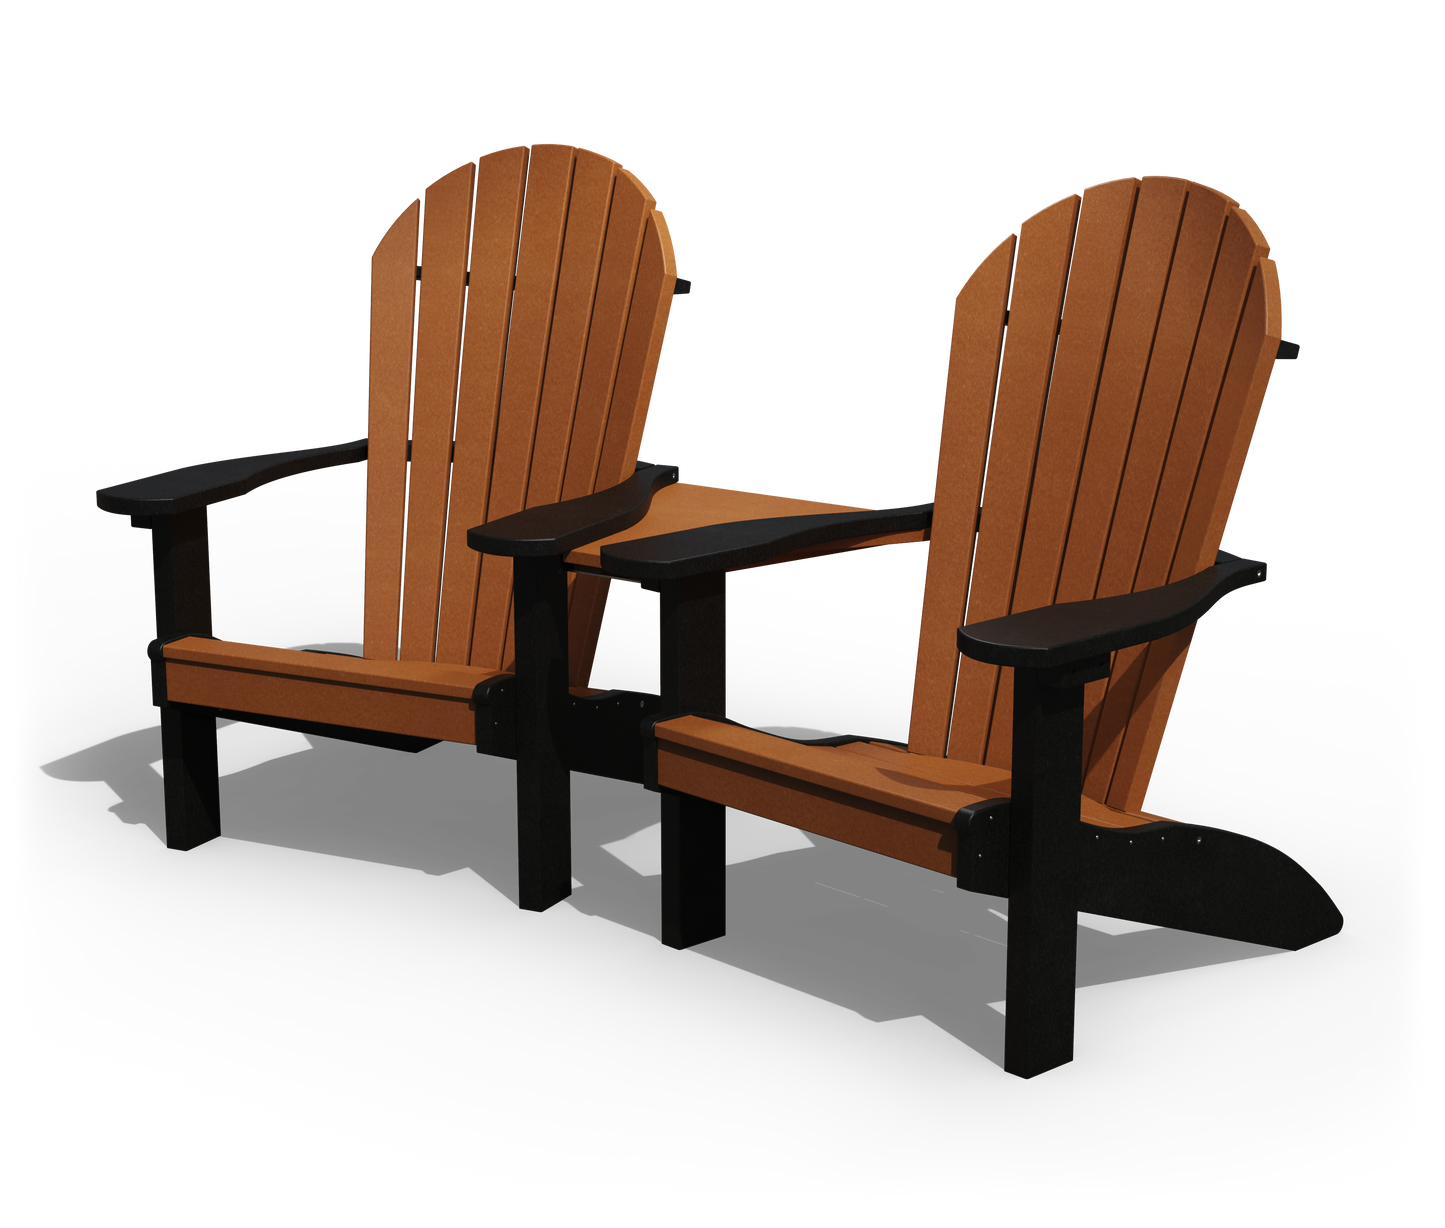 Patiova Recycled Plastic Adirondack Chair Centerpiece (CHAIRS SOLD SEPARATELY) - LEAD TIME TO SHIP 3 WEEKS